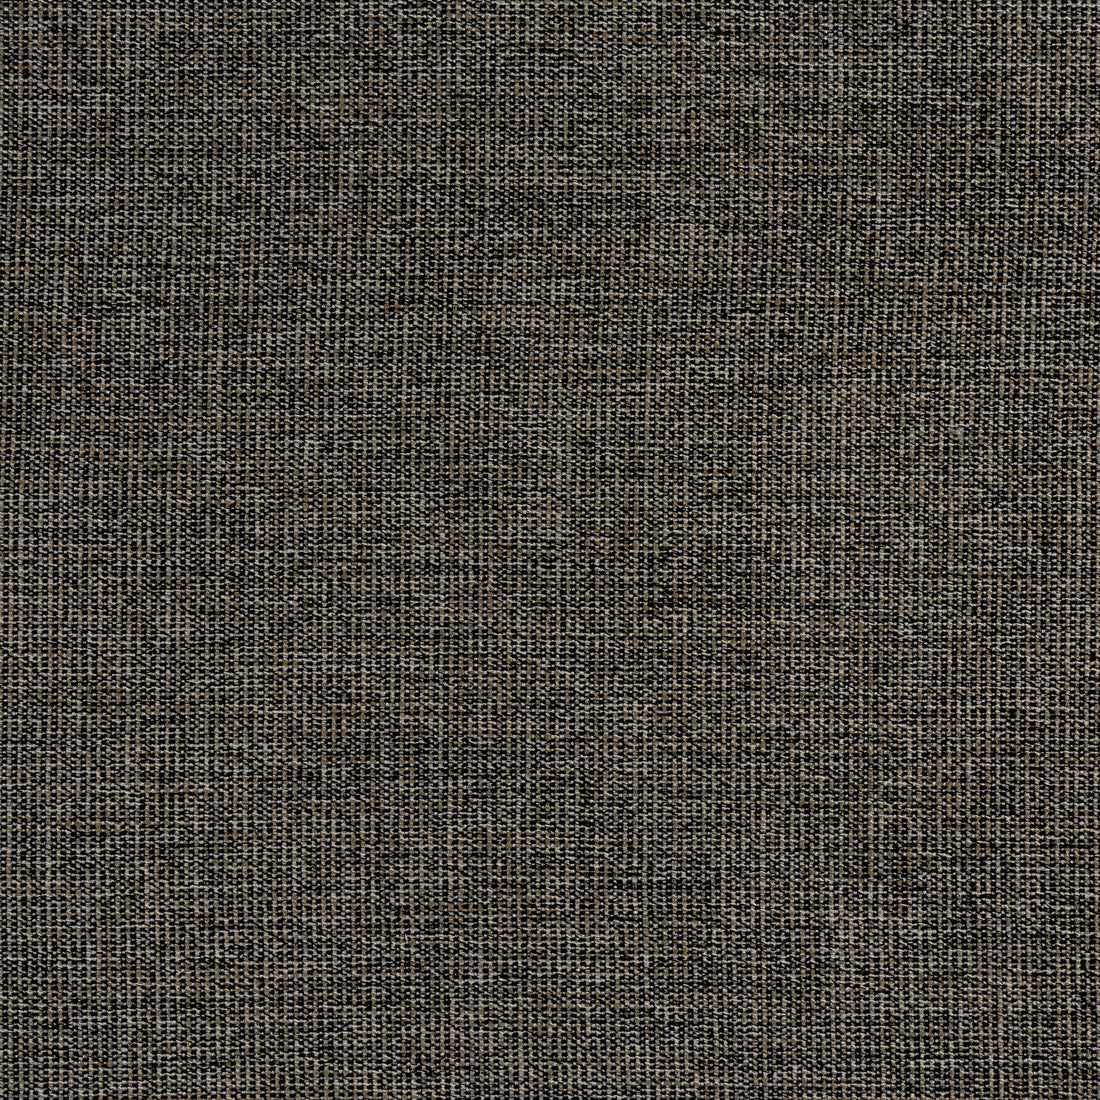 Sacchi fabric in ebony color - pattern number W8758 - by Thibaut in the Haven Textures collection